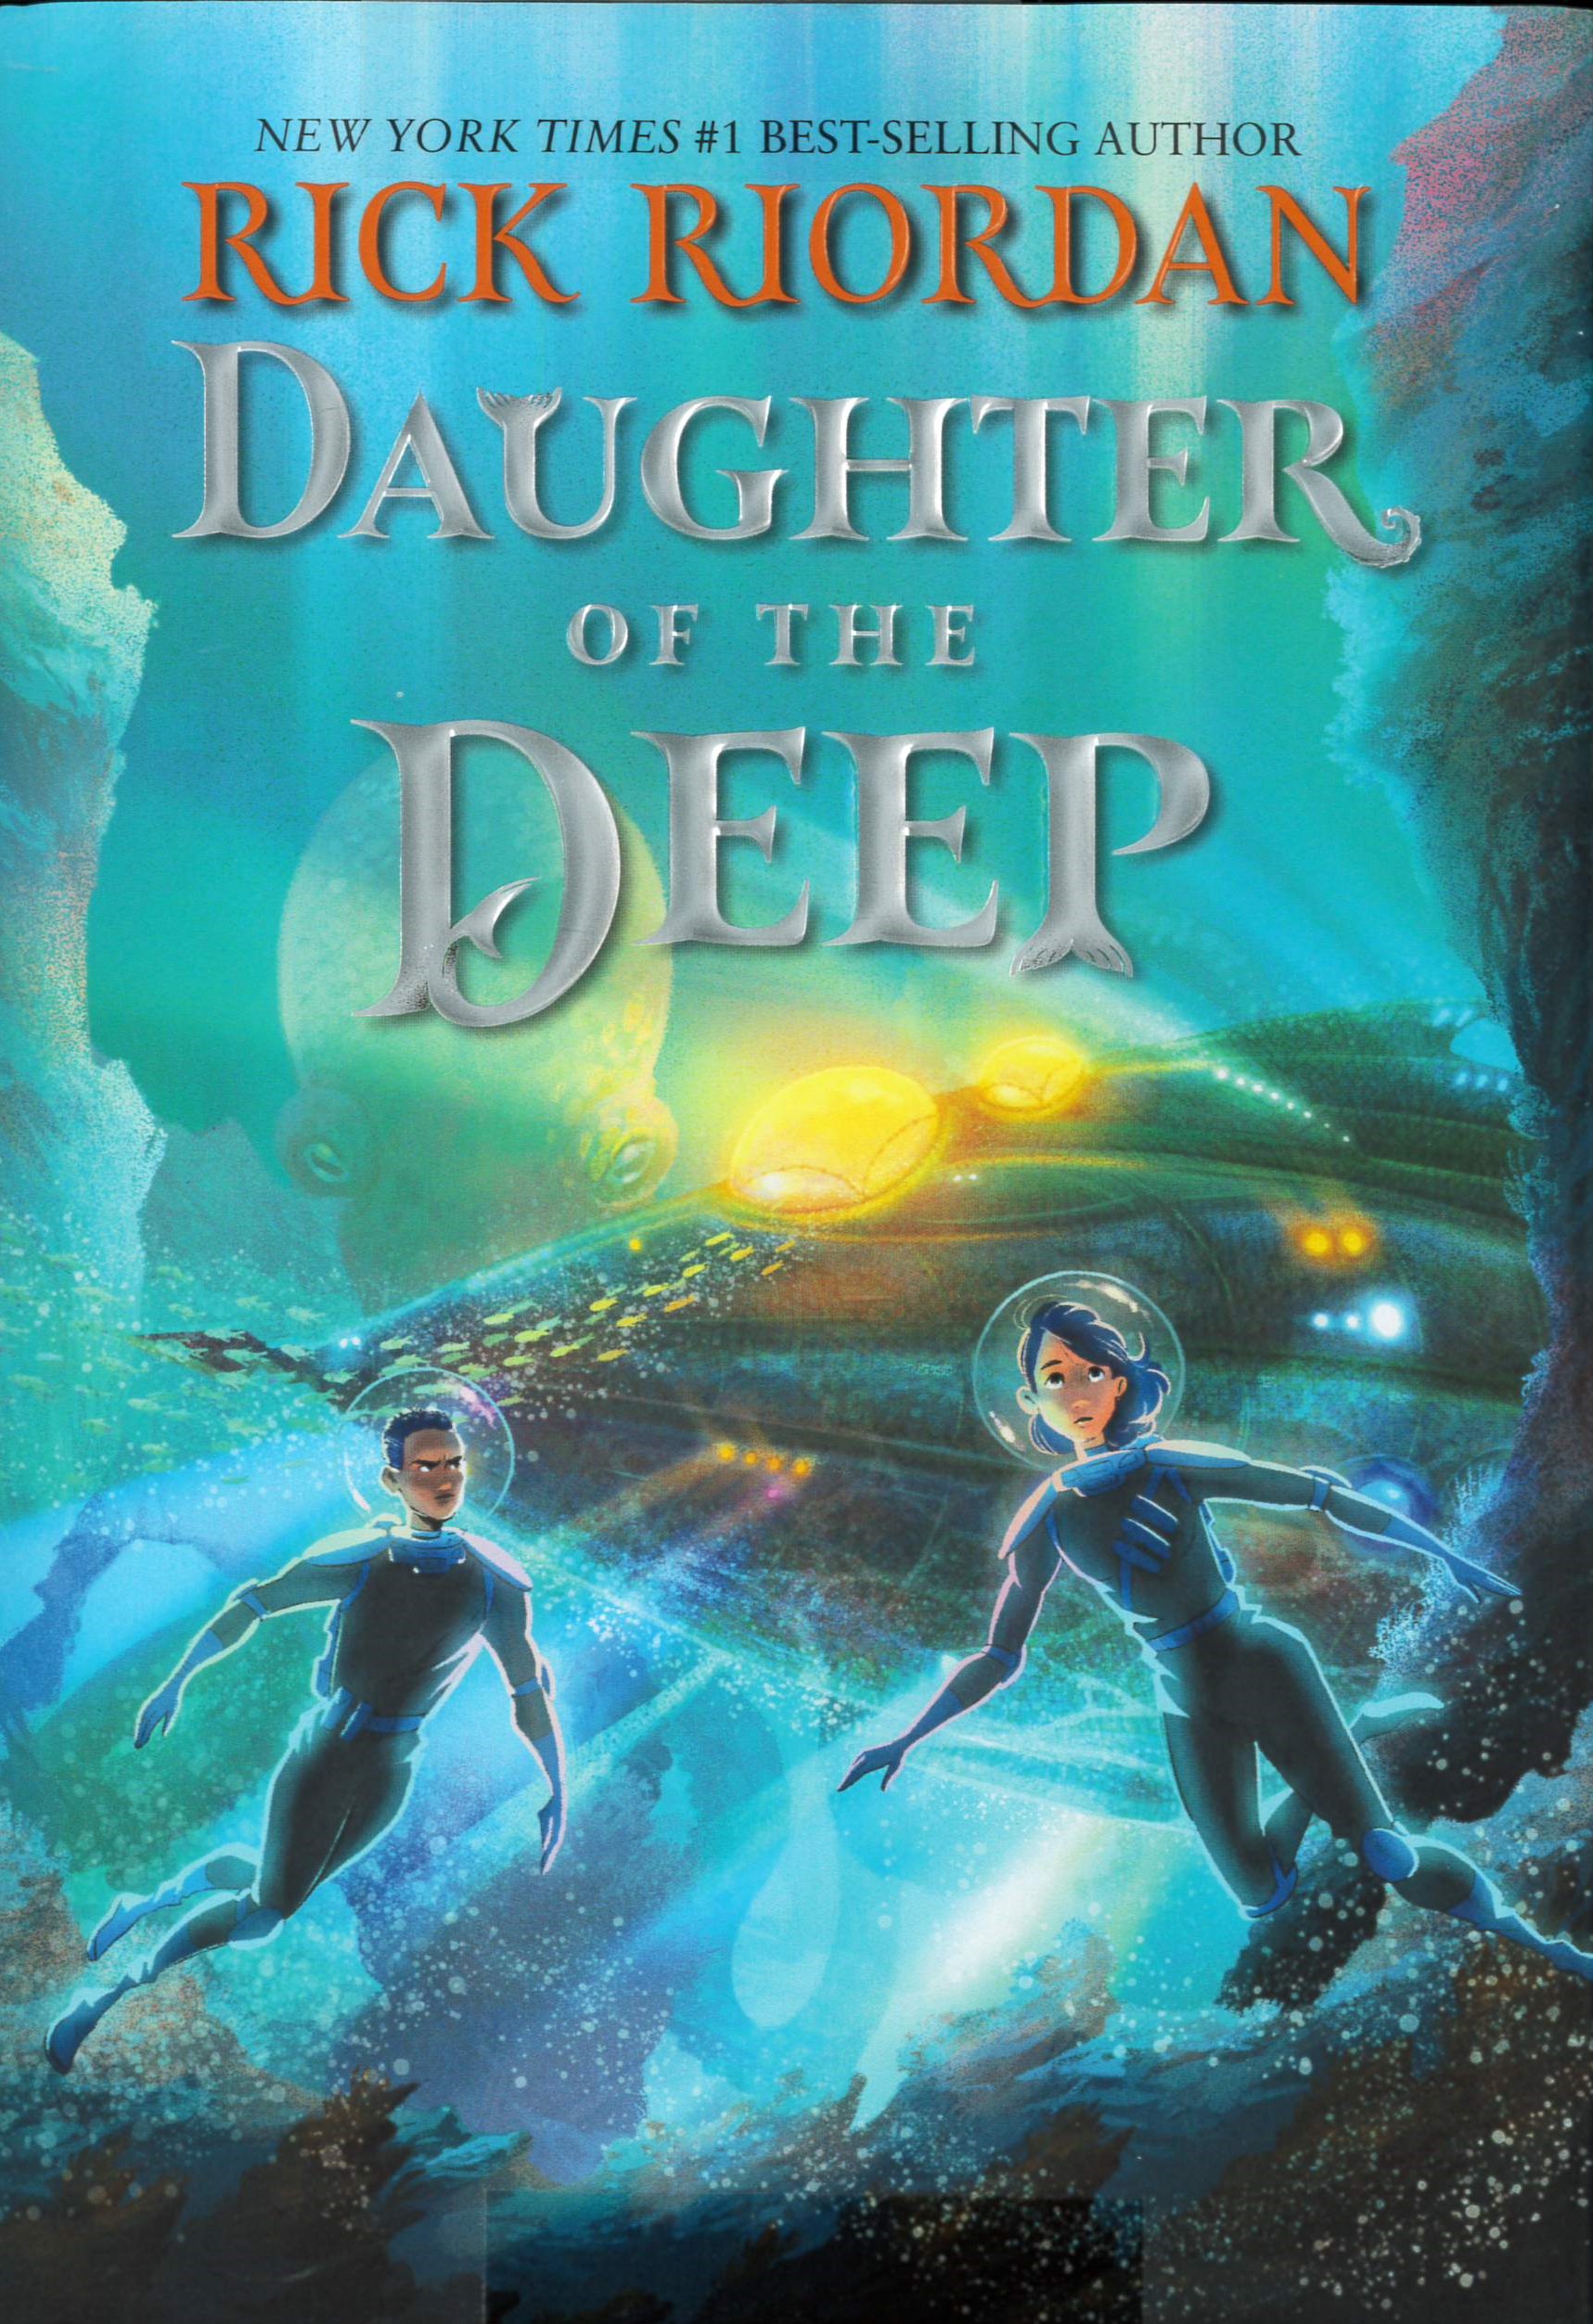 Daughter of the deep /